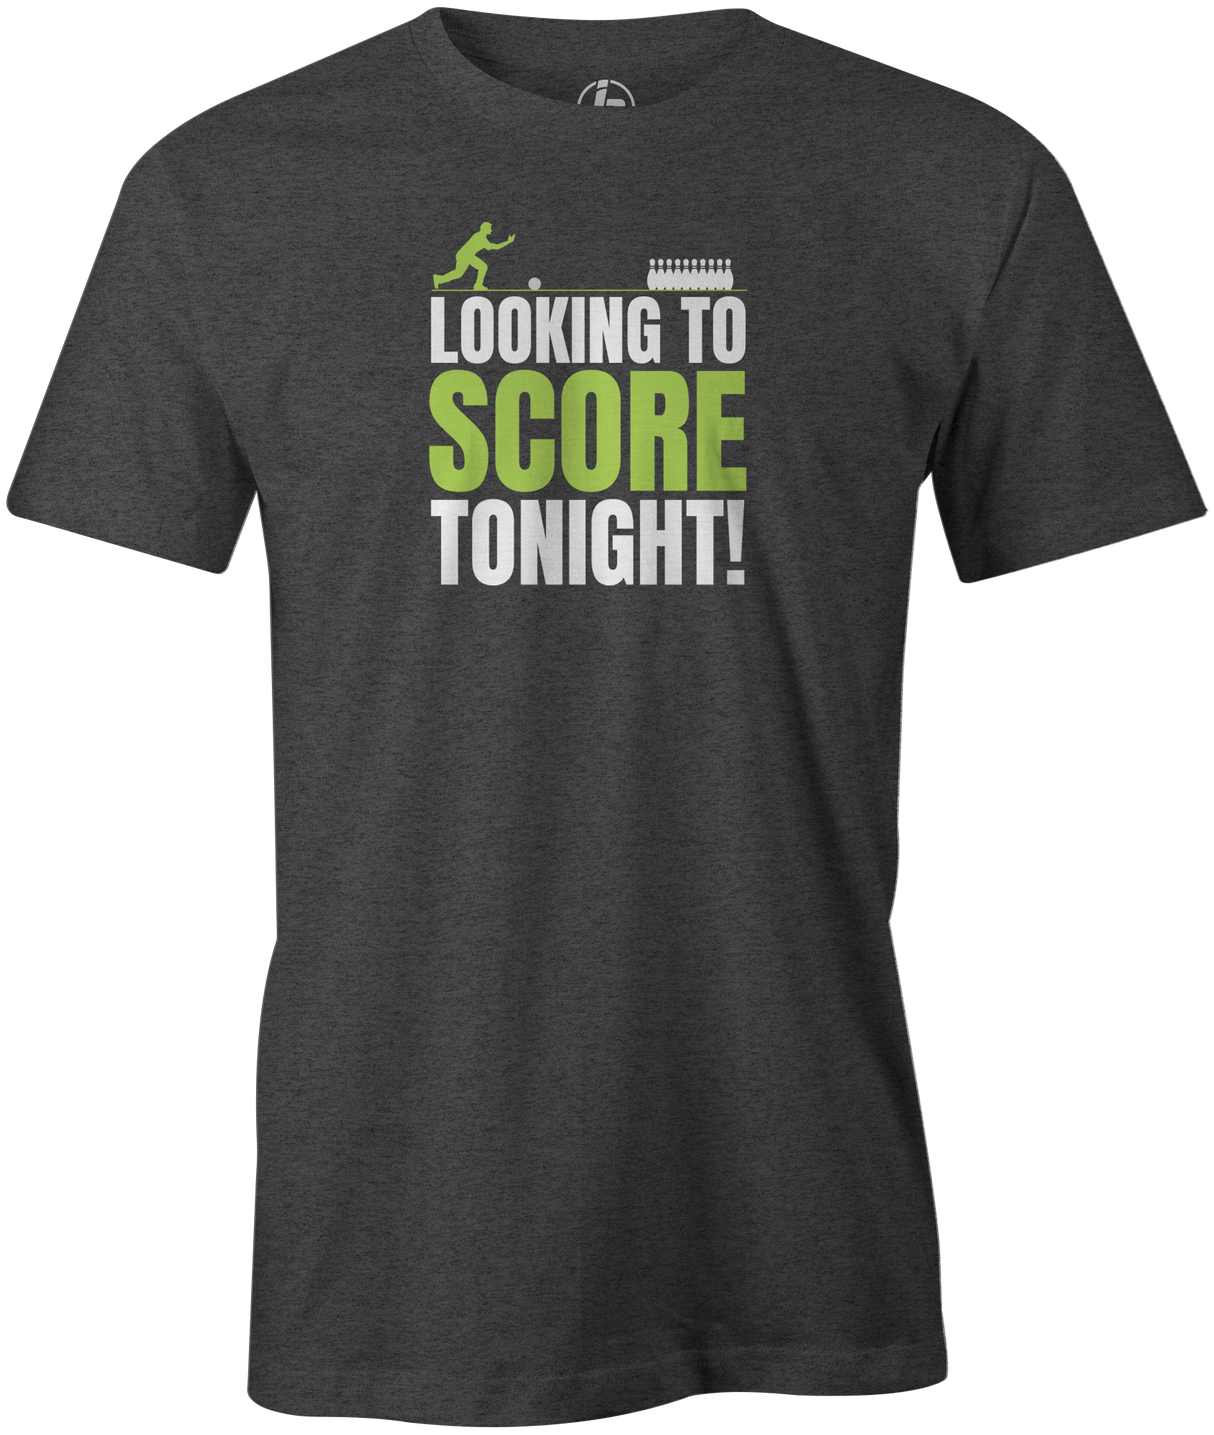 Looking to score tonight? Head to the lanes in this HOT Tee!  A perfect shirt for a bowling date night with your girlfriend or boyfriend. Have fun with this funny bowling tshirt design. Night out with friends bowling. Crazy bowl. bowlingshirt. 